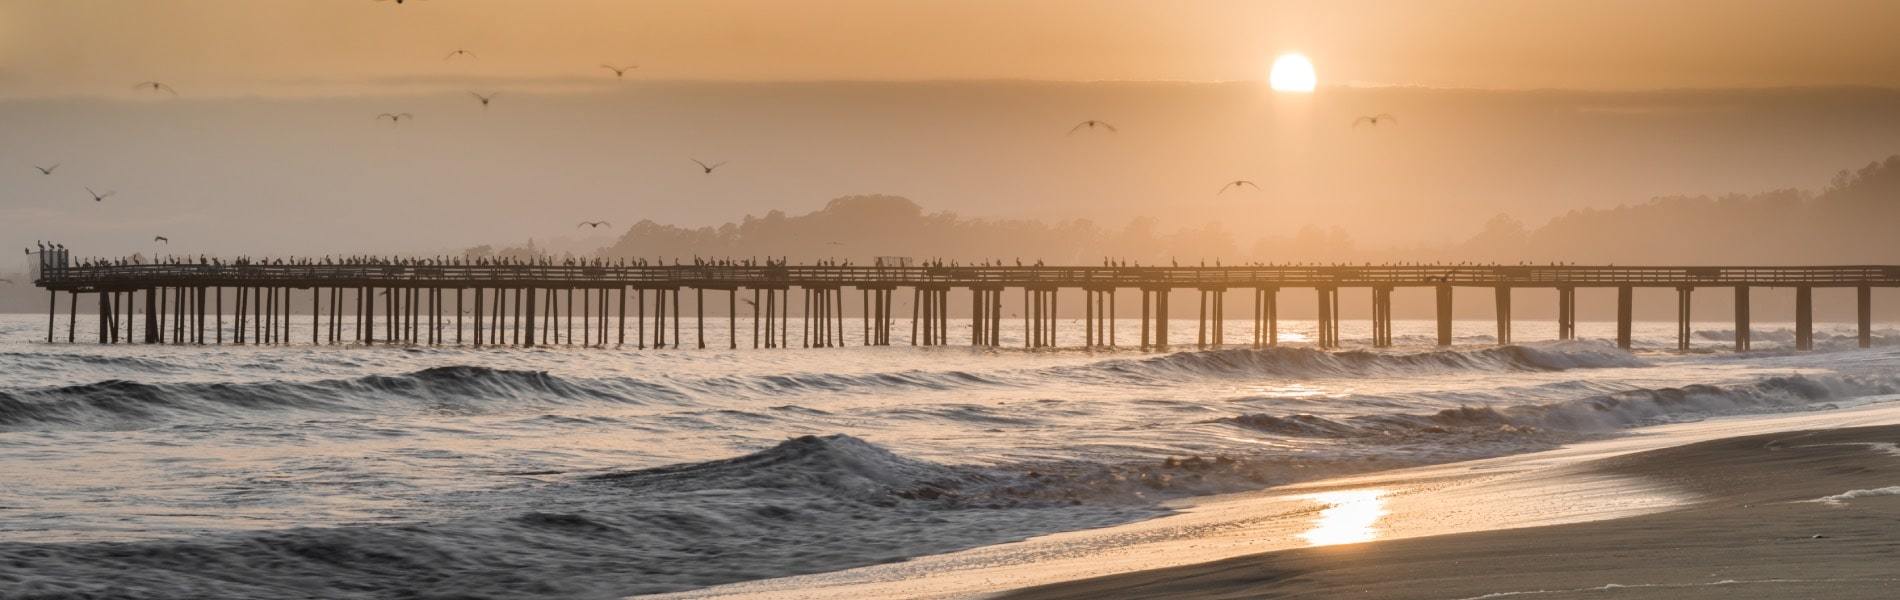 View of waves and pier in Seacliff, CA